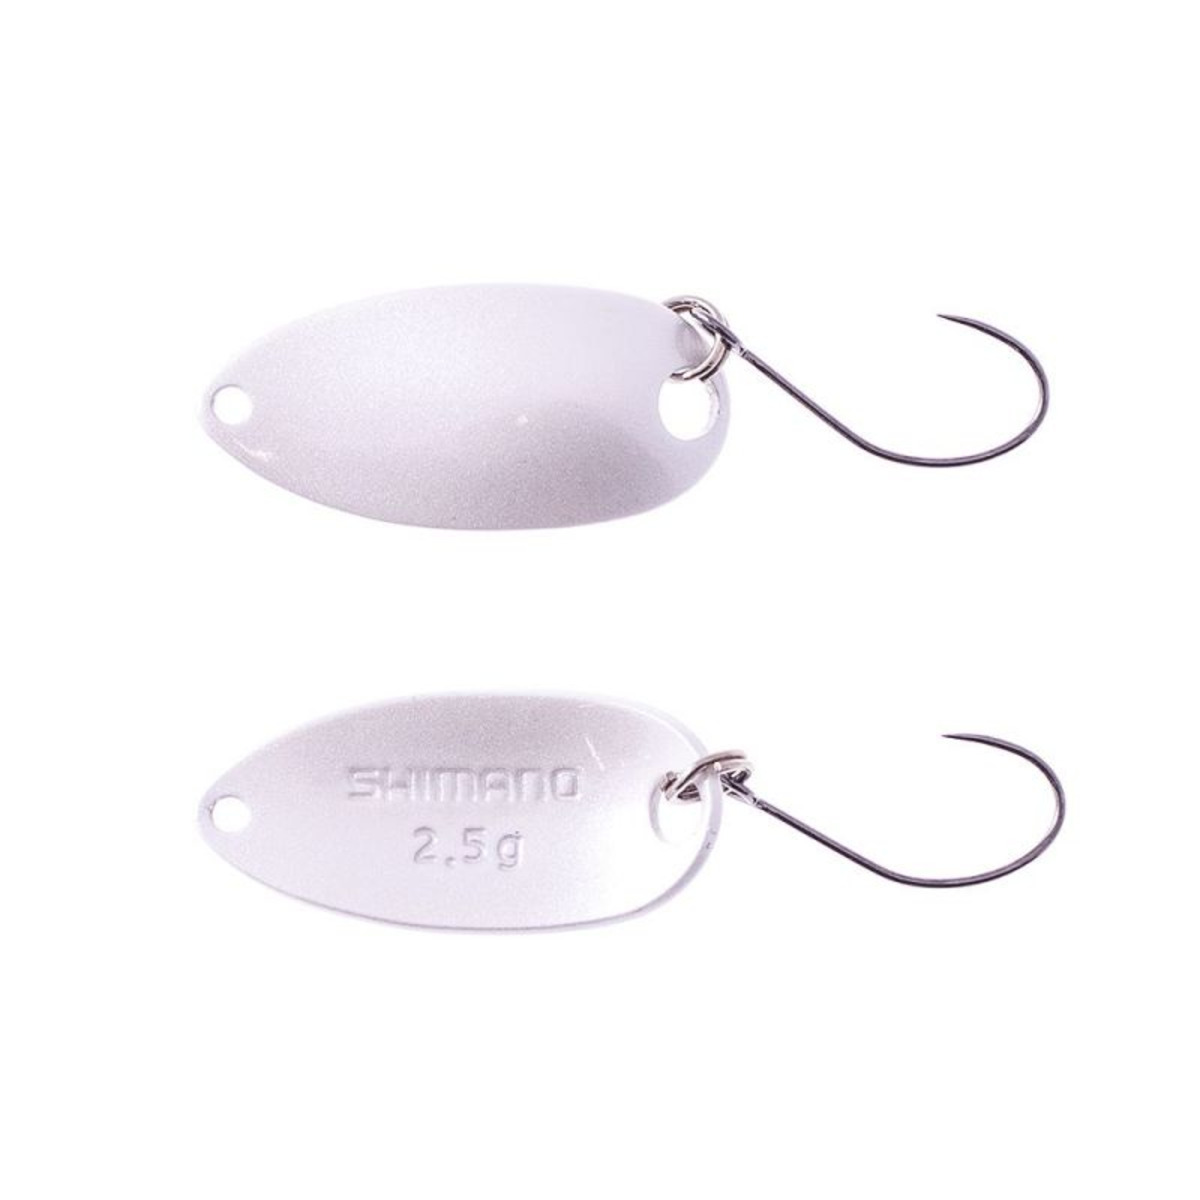 Shimano Cardiff Roll Swimmer - 1.8 g - Pearl White